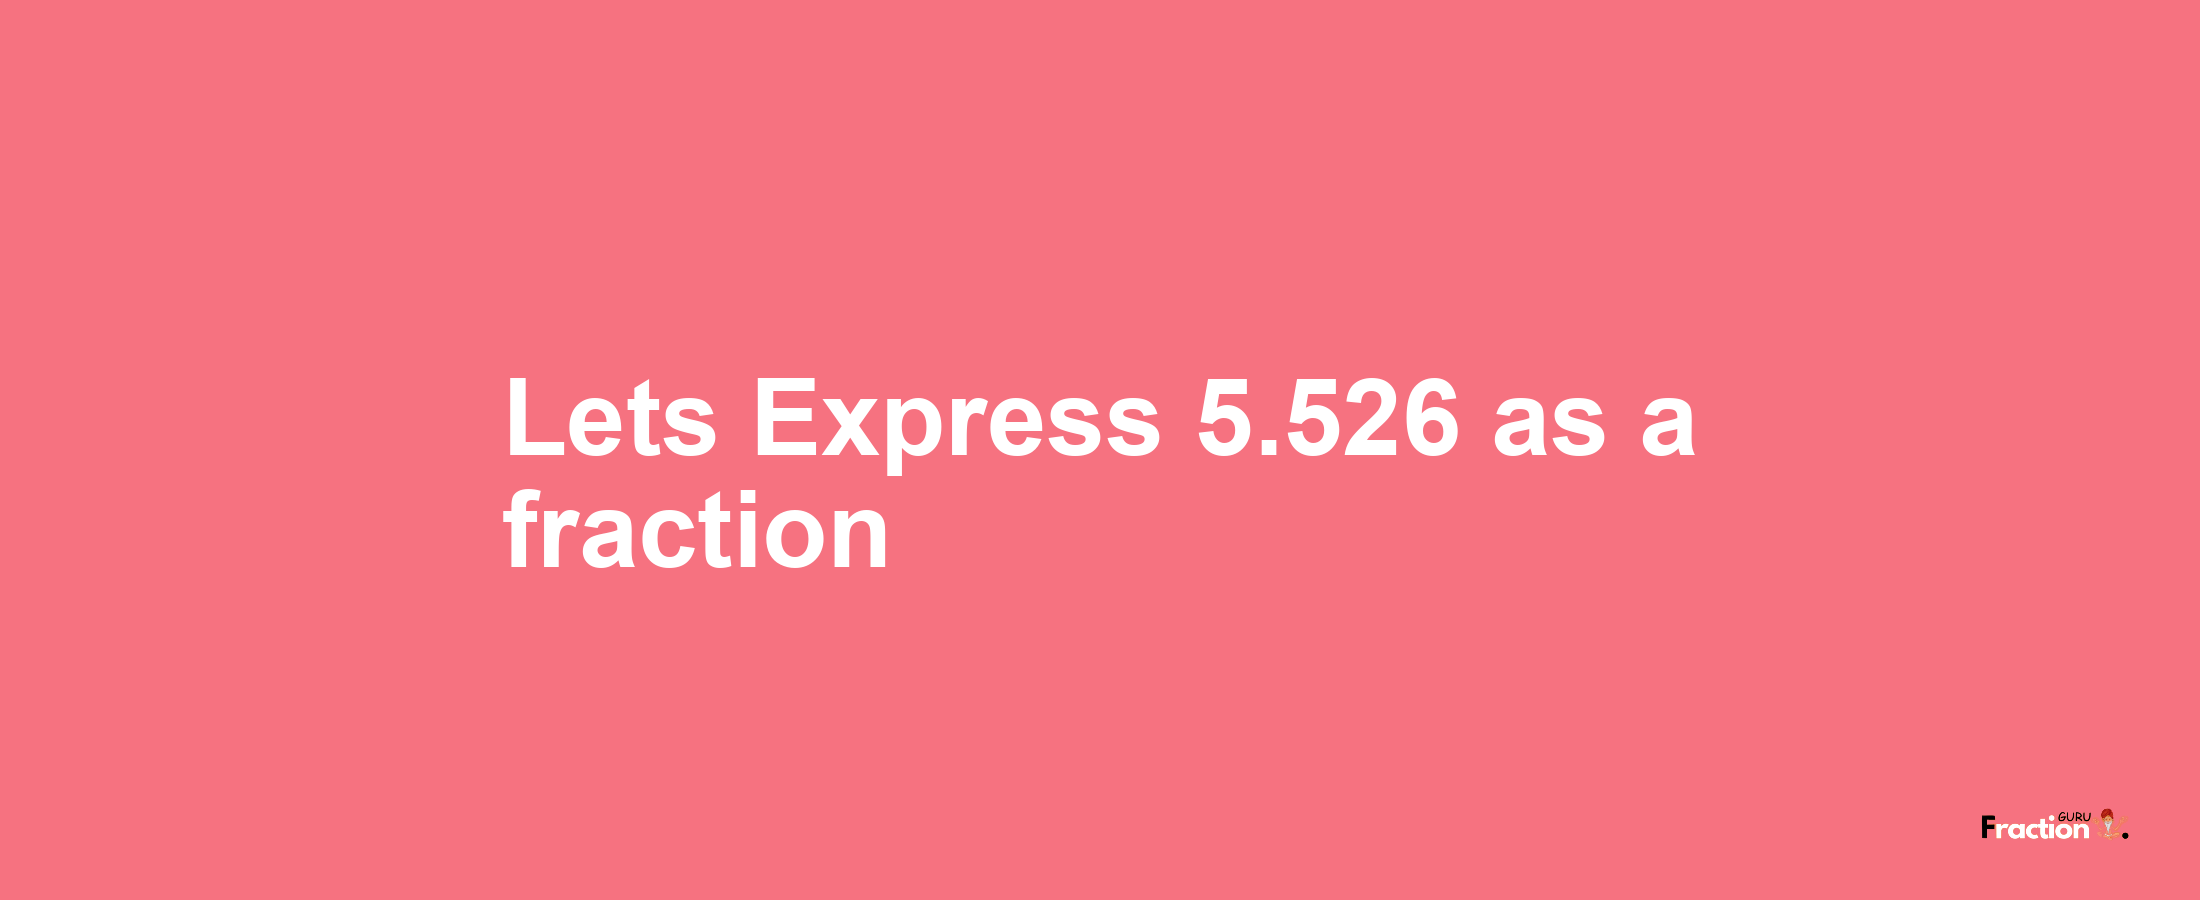 Lets Express 5.526 as afraction